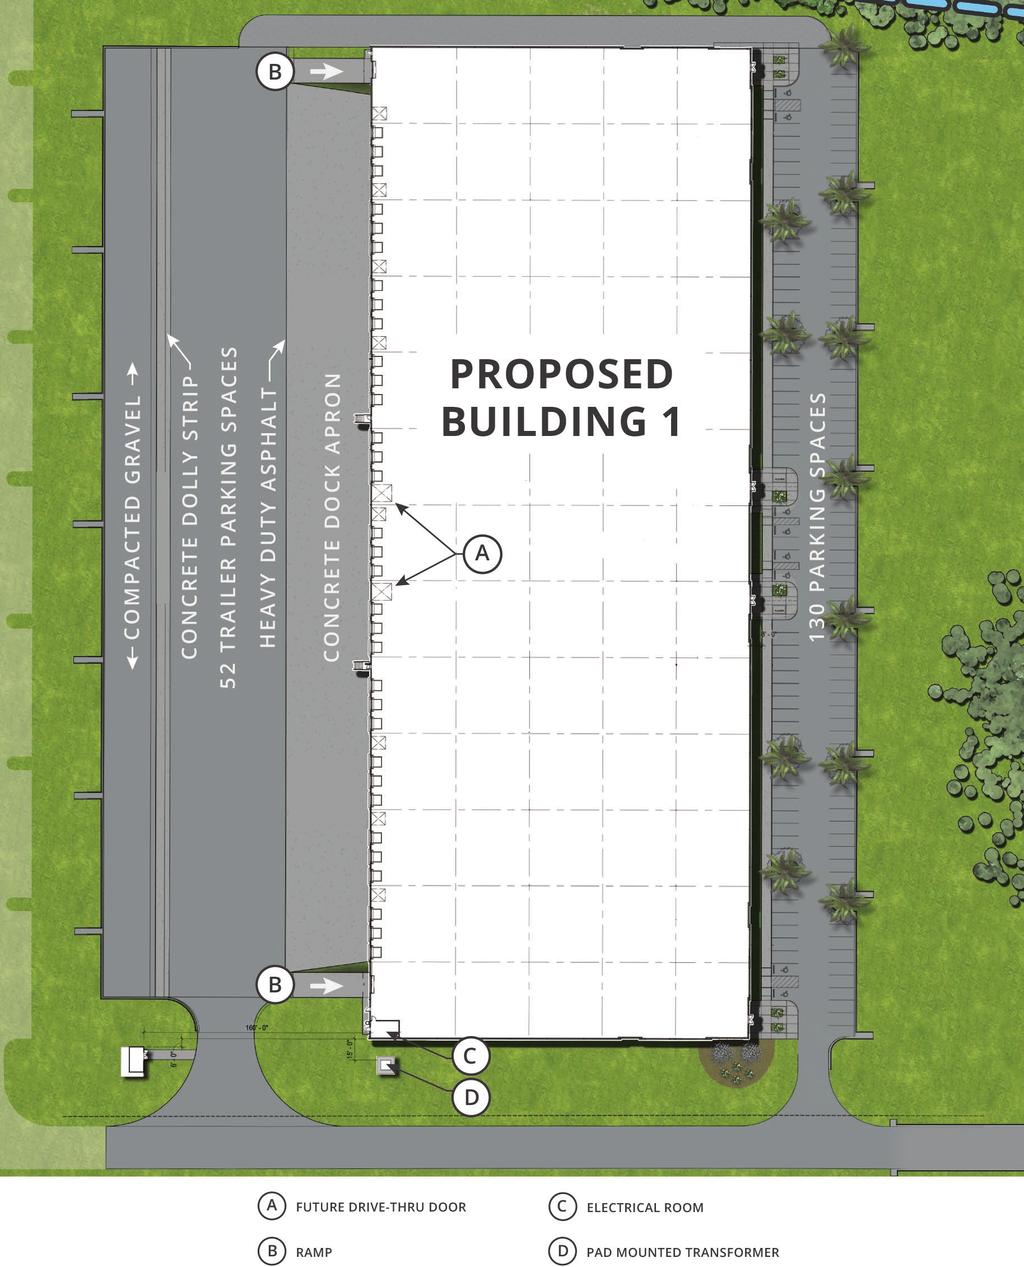 BUILDING ONE SITE PLAN BUILDING ONE FEATURES Able to accommodate a variety of users Ample parking Fully fenced Building One Specifications Total SF Minimum Divisibility +/- 189,418 SF 43,416 SF*